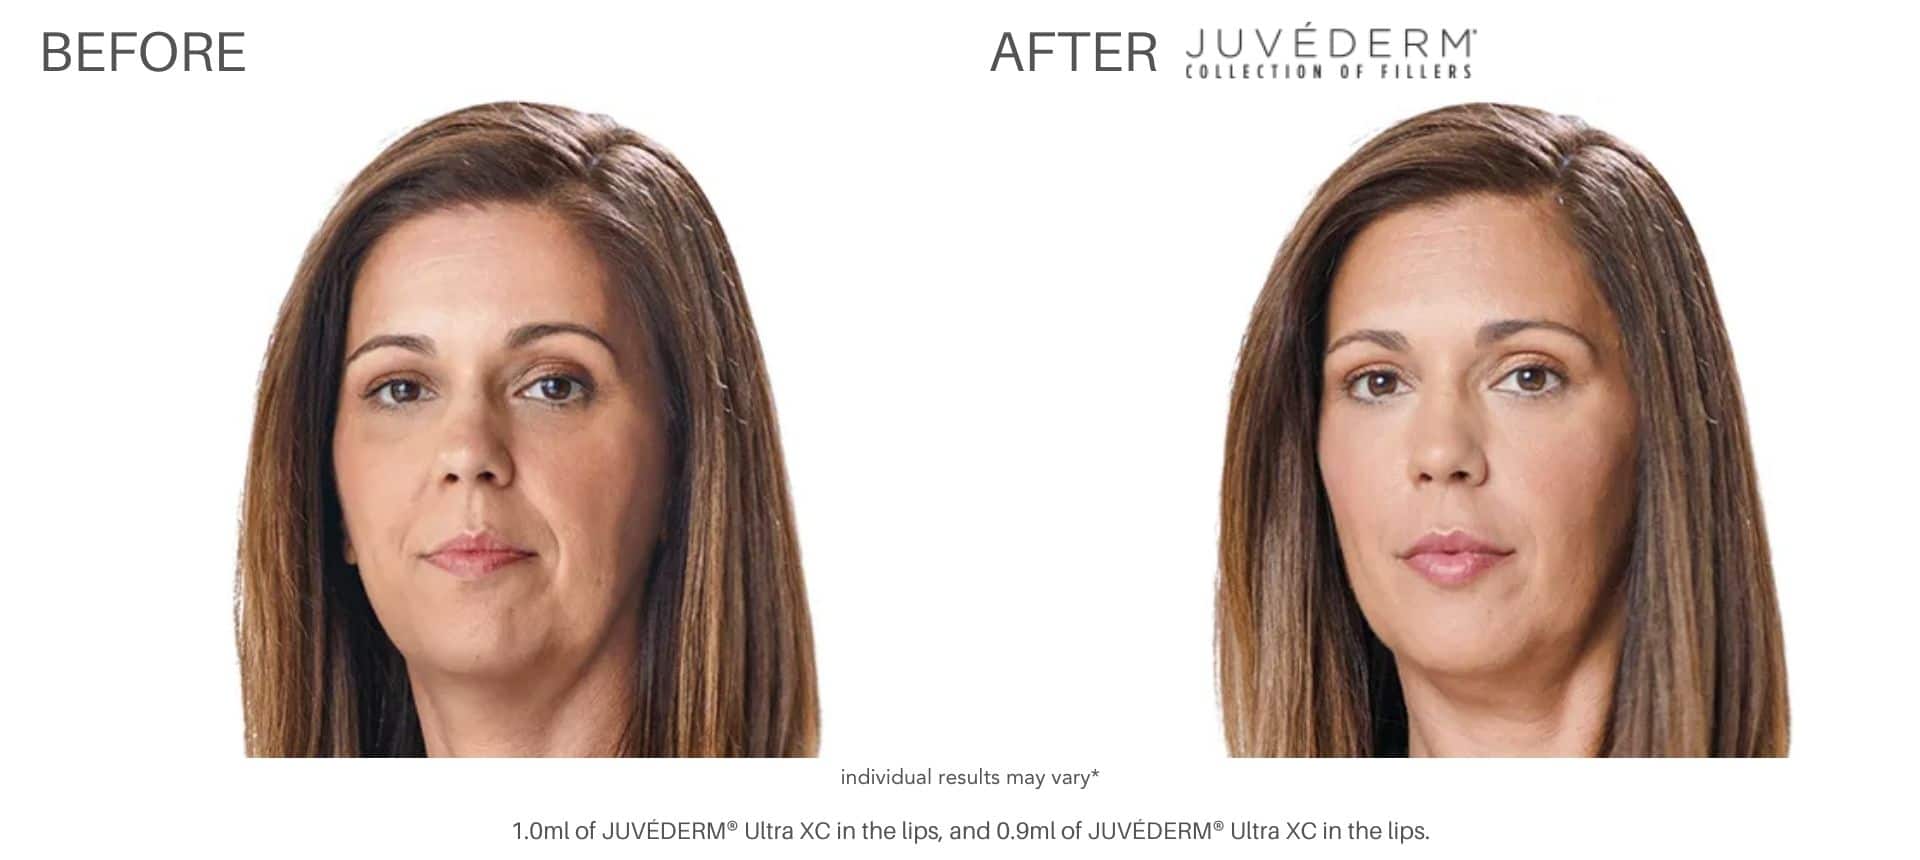 wrinkles and fine lines treatment at Advanced Rejuvenation Centers